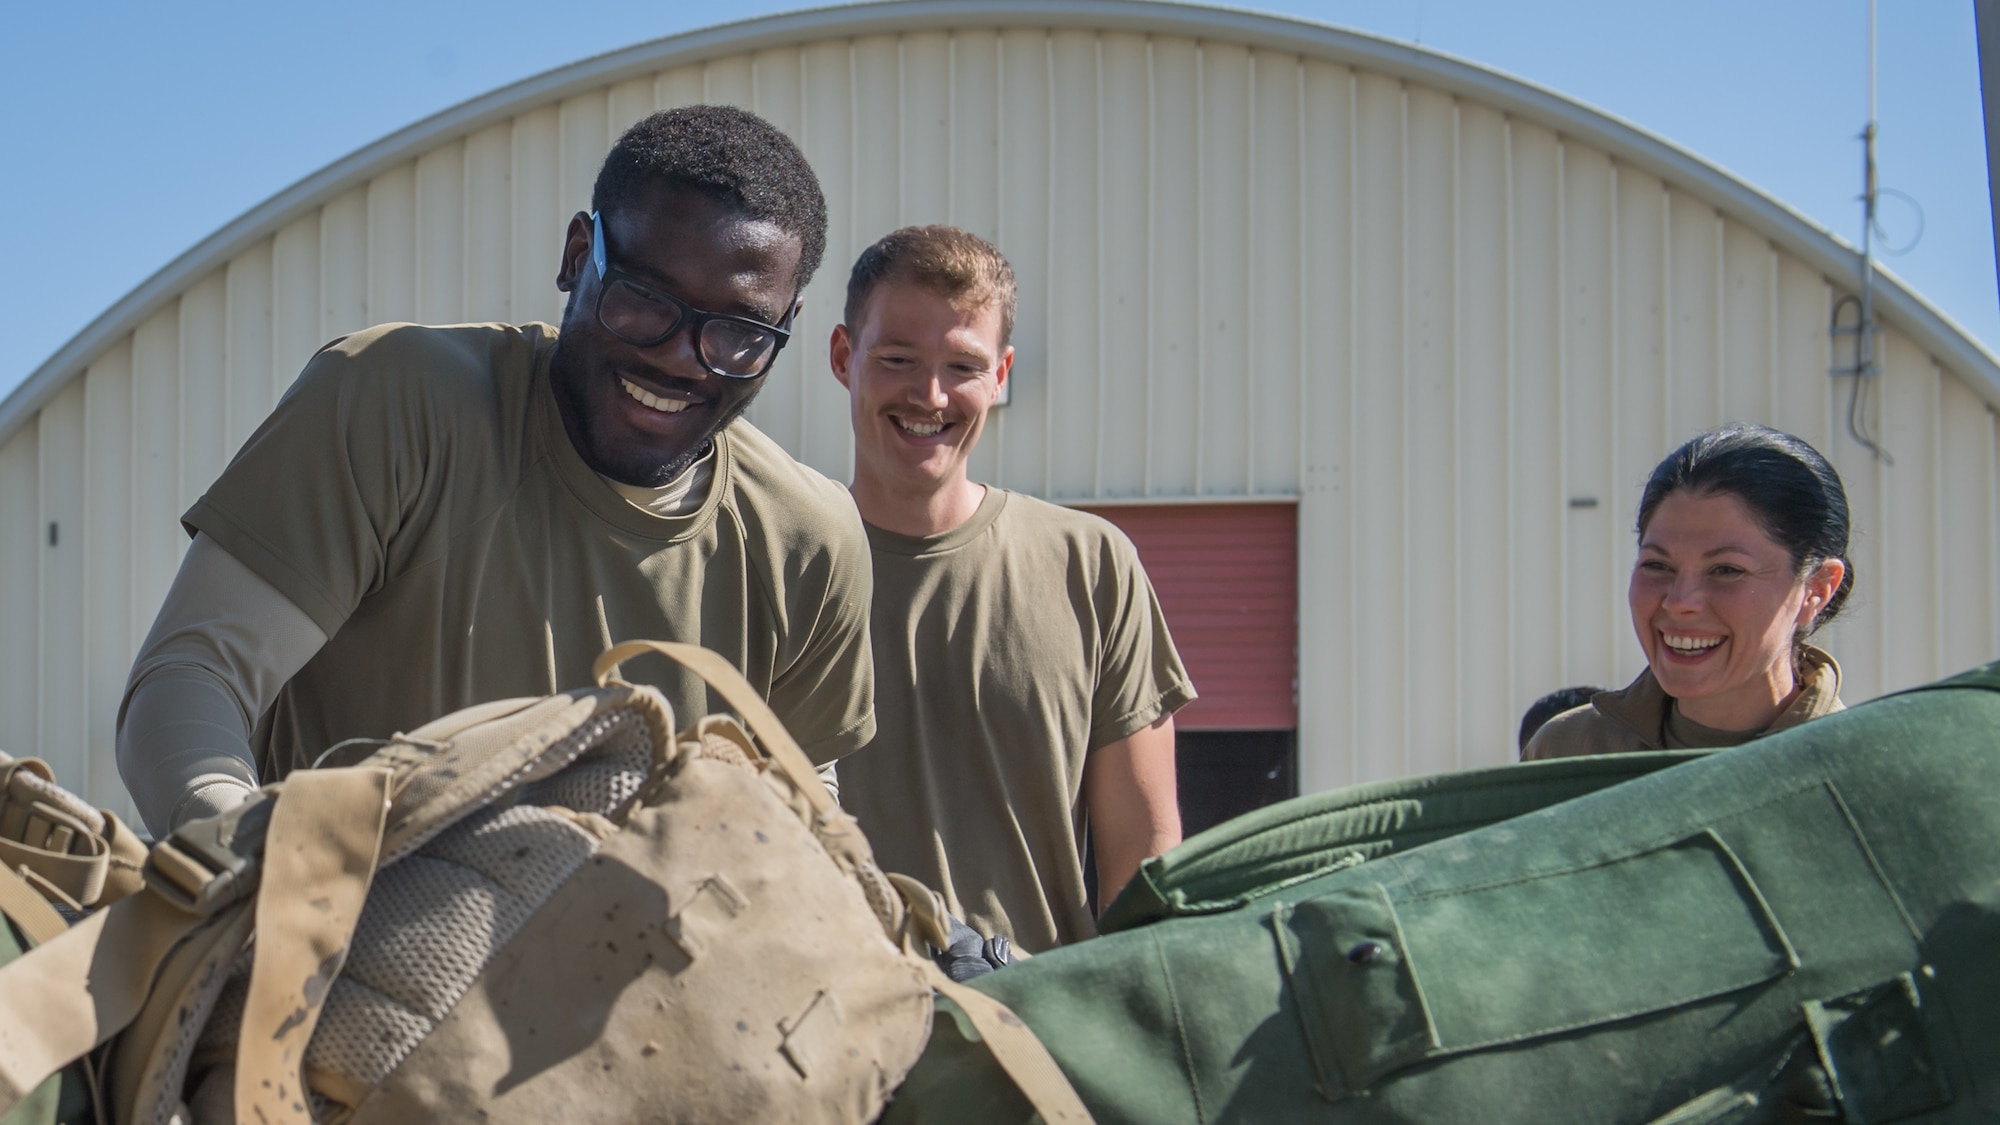 Airmen 1st Class Mbianda Nkouambong and James Bullard and Senior Airman Candace Schmitz, all assigned to the 386th Expeditionary Logistics Readiness Squadron passenger terminal, stacks bags onto a pallet at Ali Al Salem Air Base, Kuwait, Nov. 21, 2019. Since July, passenger terminal Airmen have built more than 15,000 pallets for transport. (U.S. Air Force photo by Tech. Sgt. Daniel Martinez)